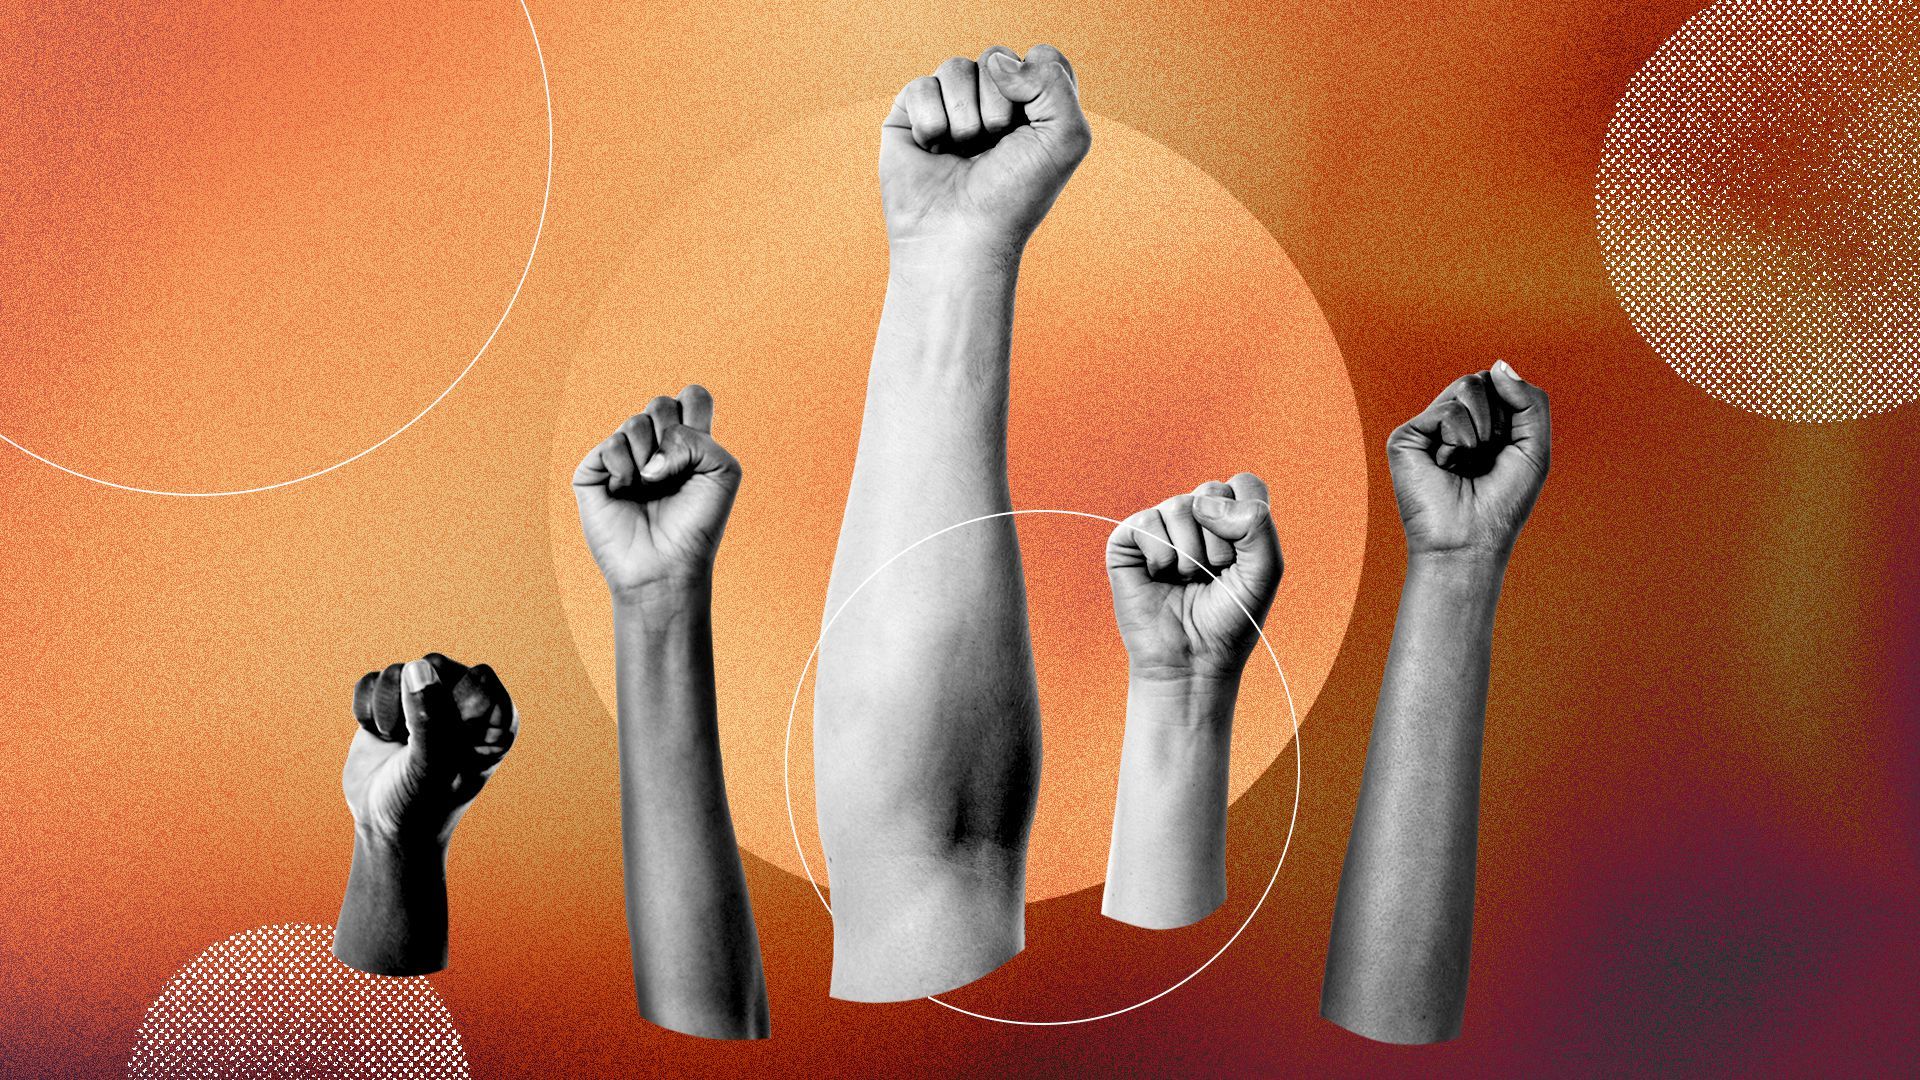 Illustration of multiple clenched fists in the air.